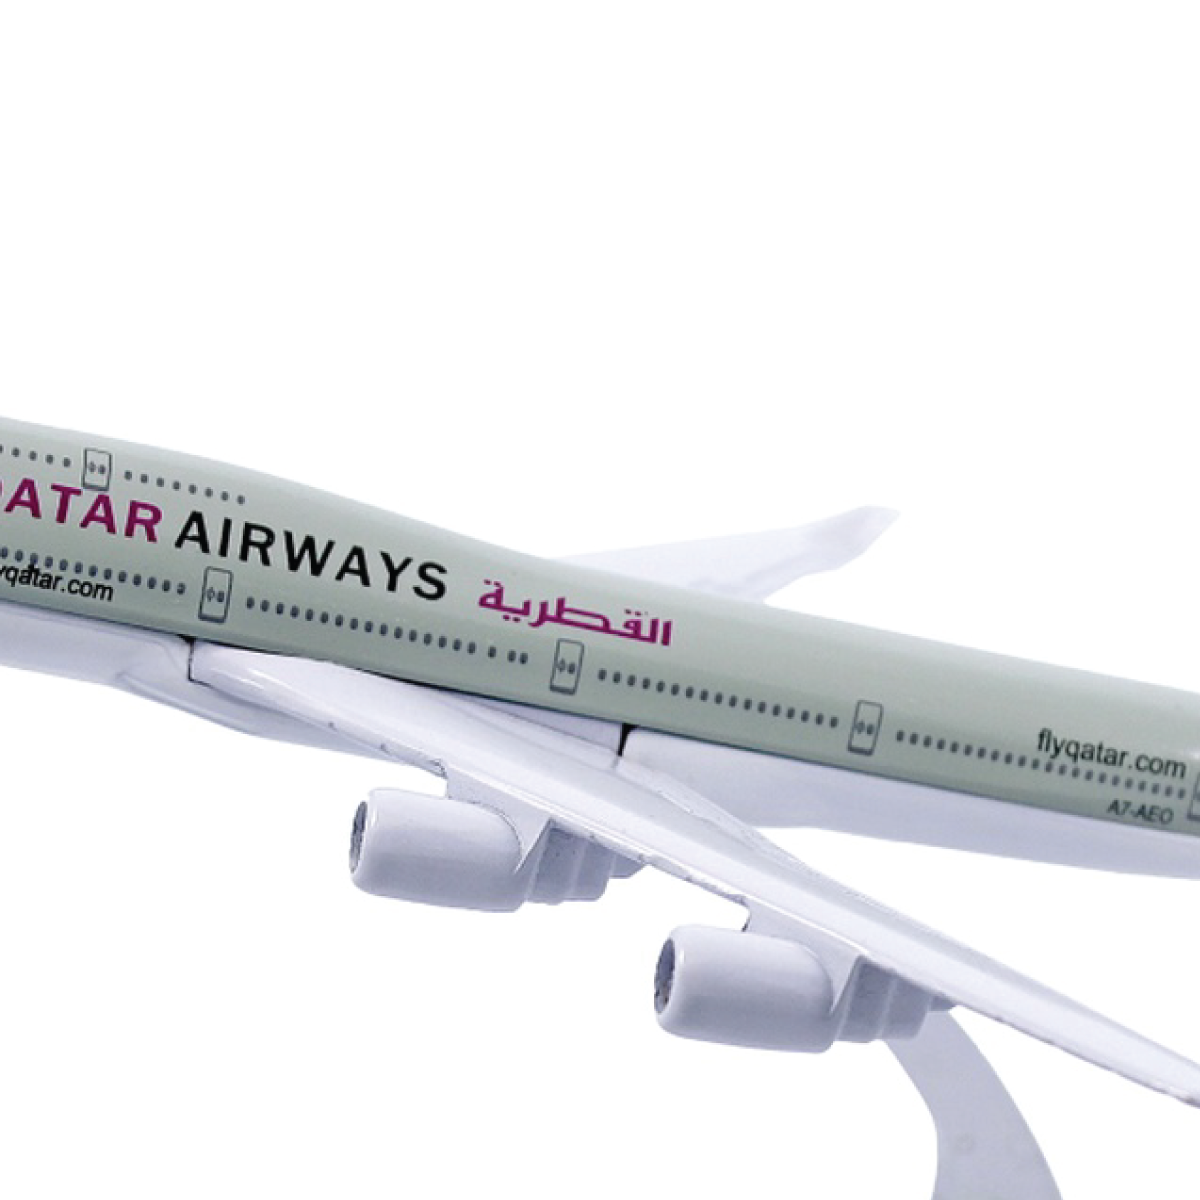 Aircraft Model Small Qatar Airways - For Office Use, Personal Use, or Corporate Gifting-JA